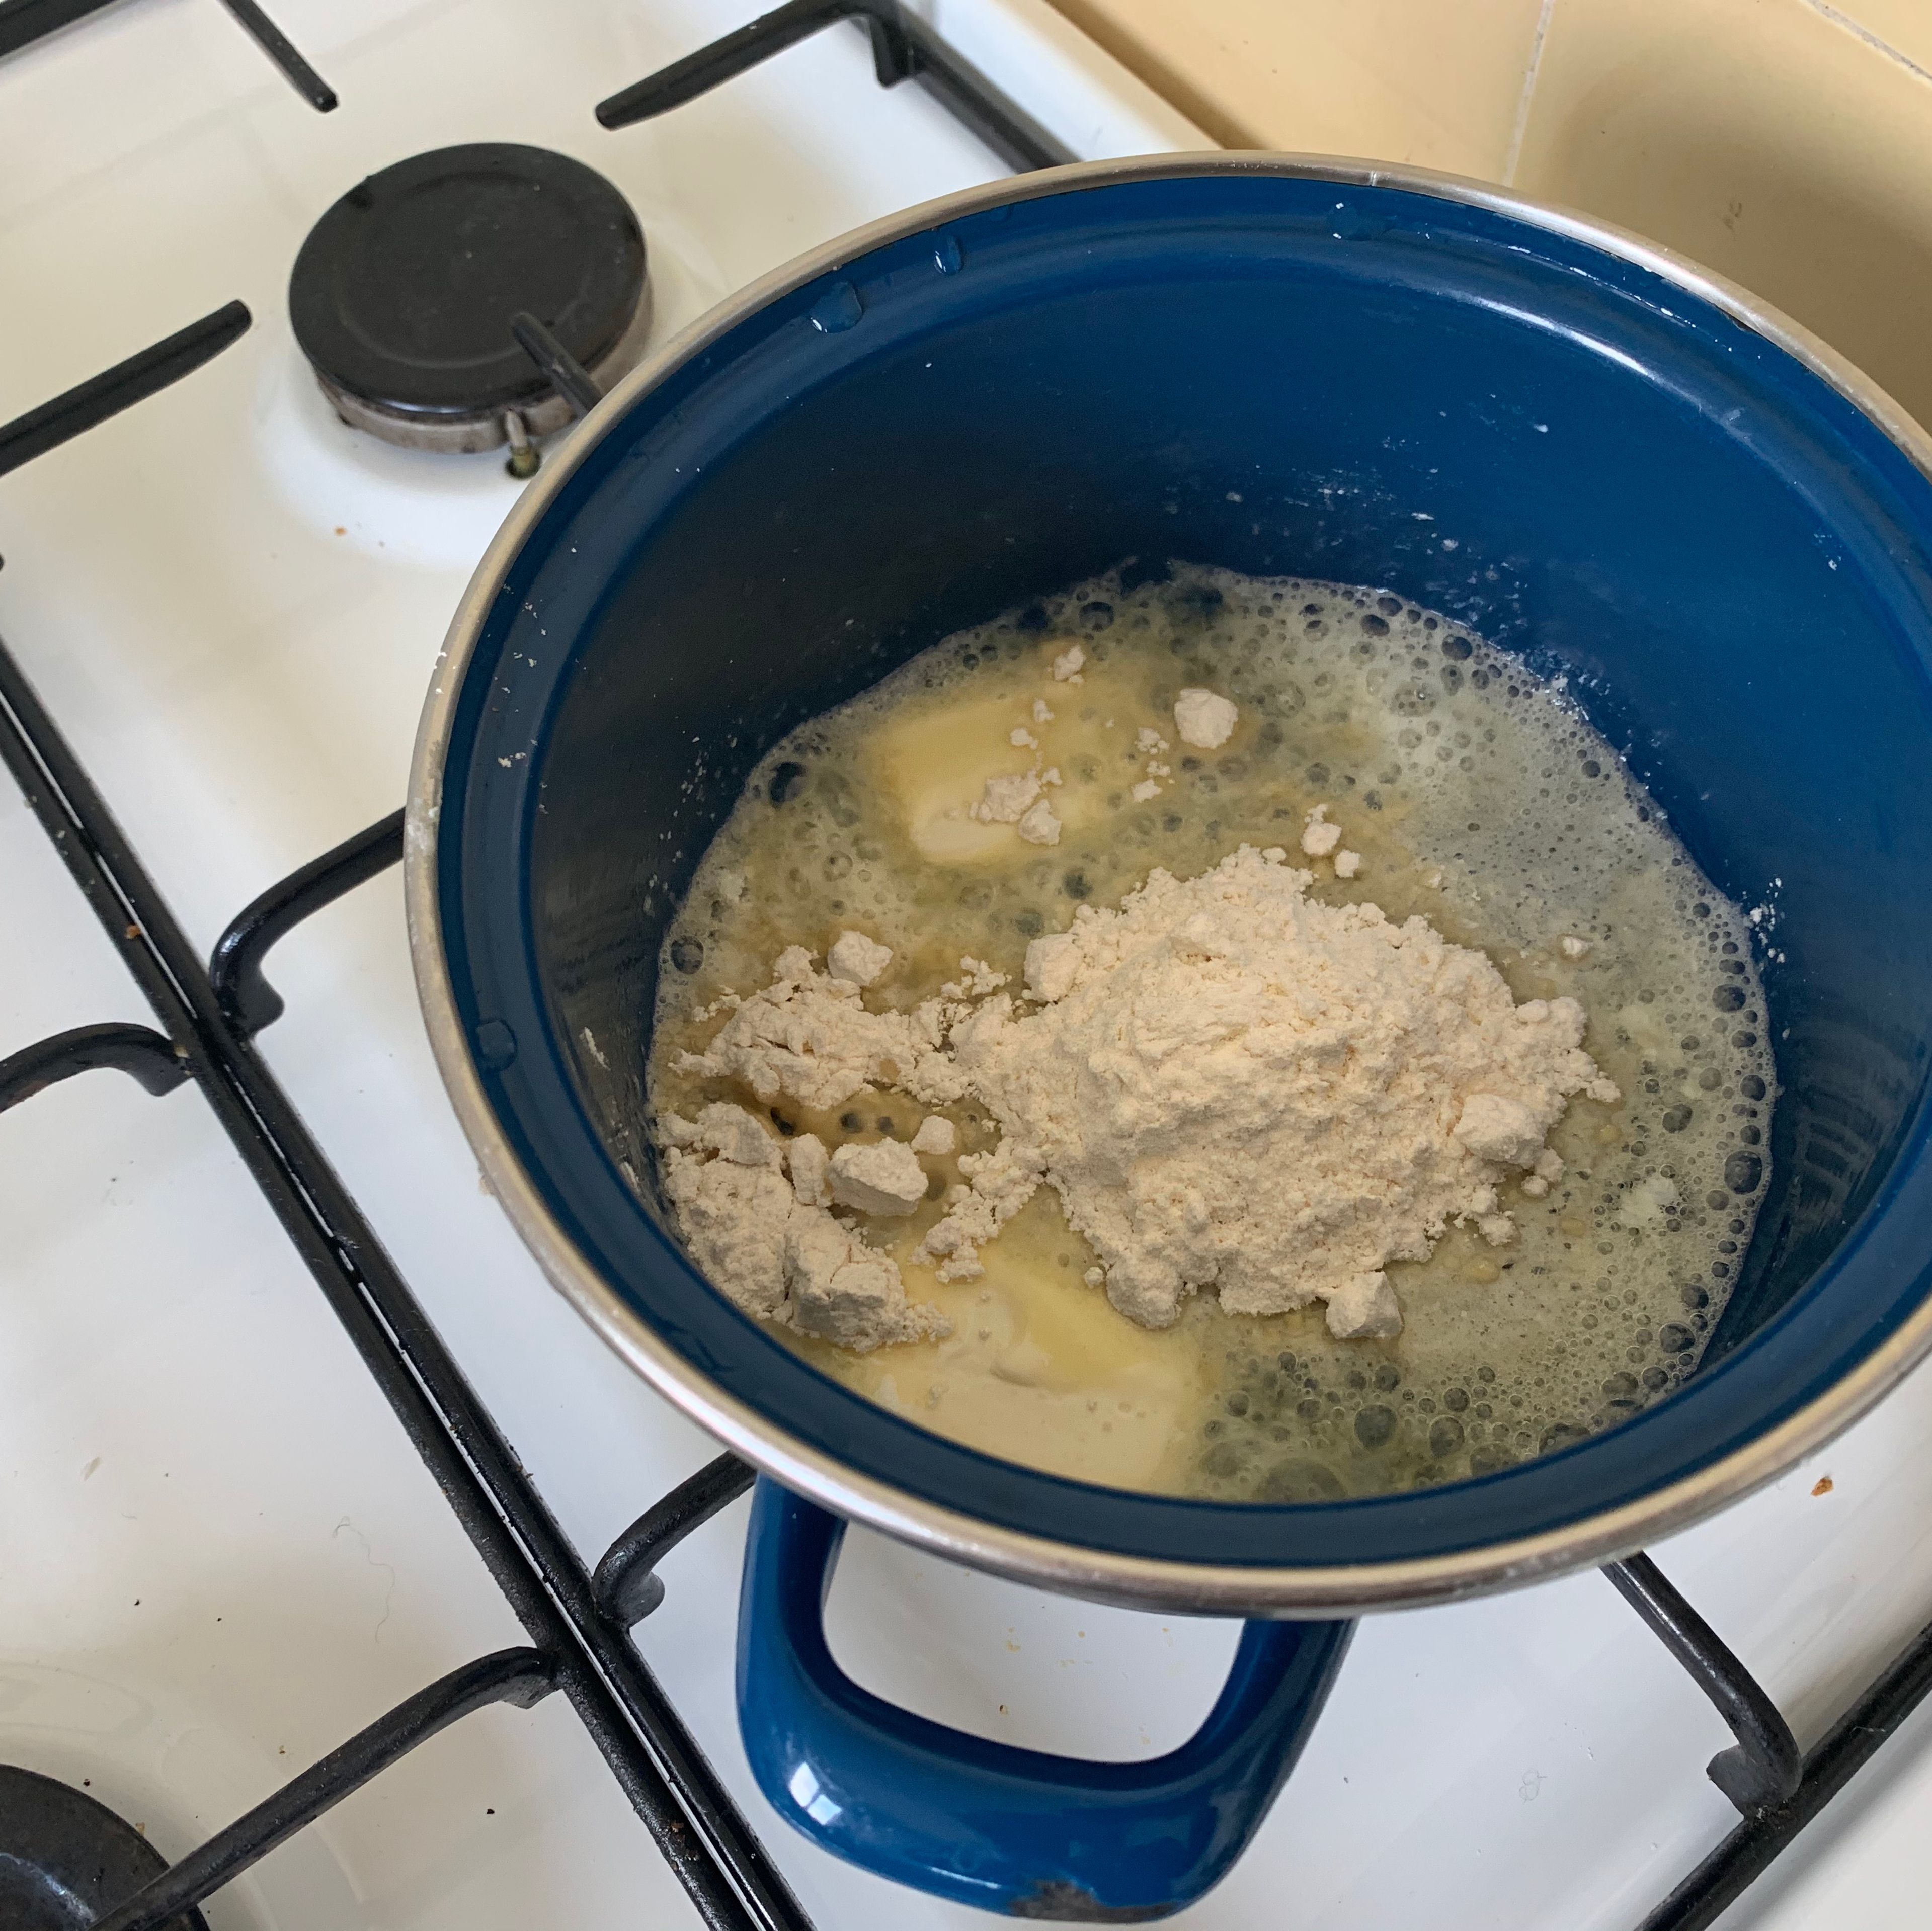 Melt butter in another pot, add flour and sauté briefly while stirring with a whisk.